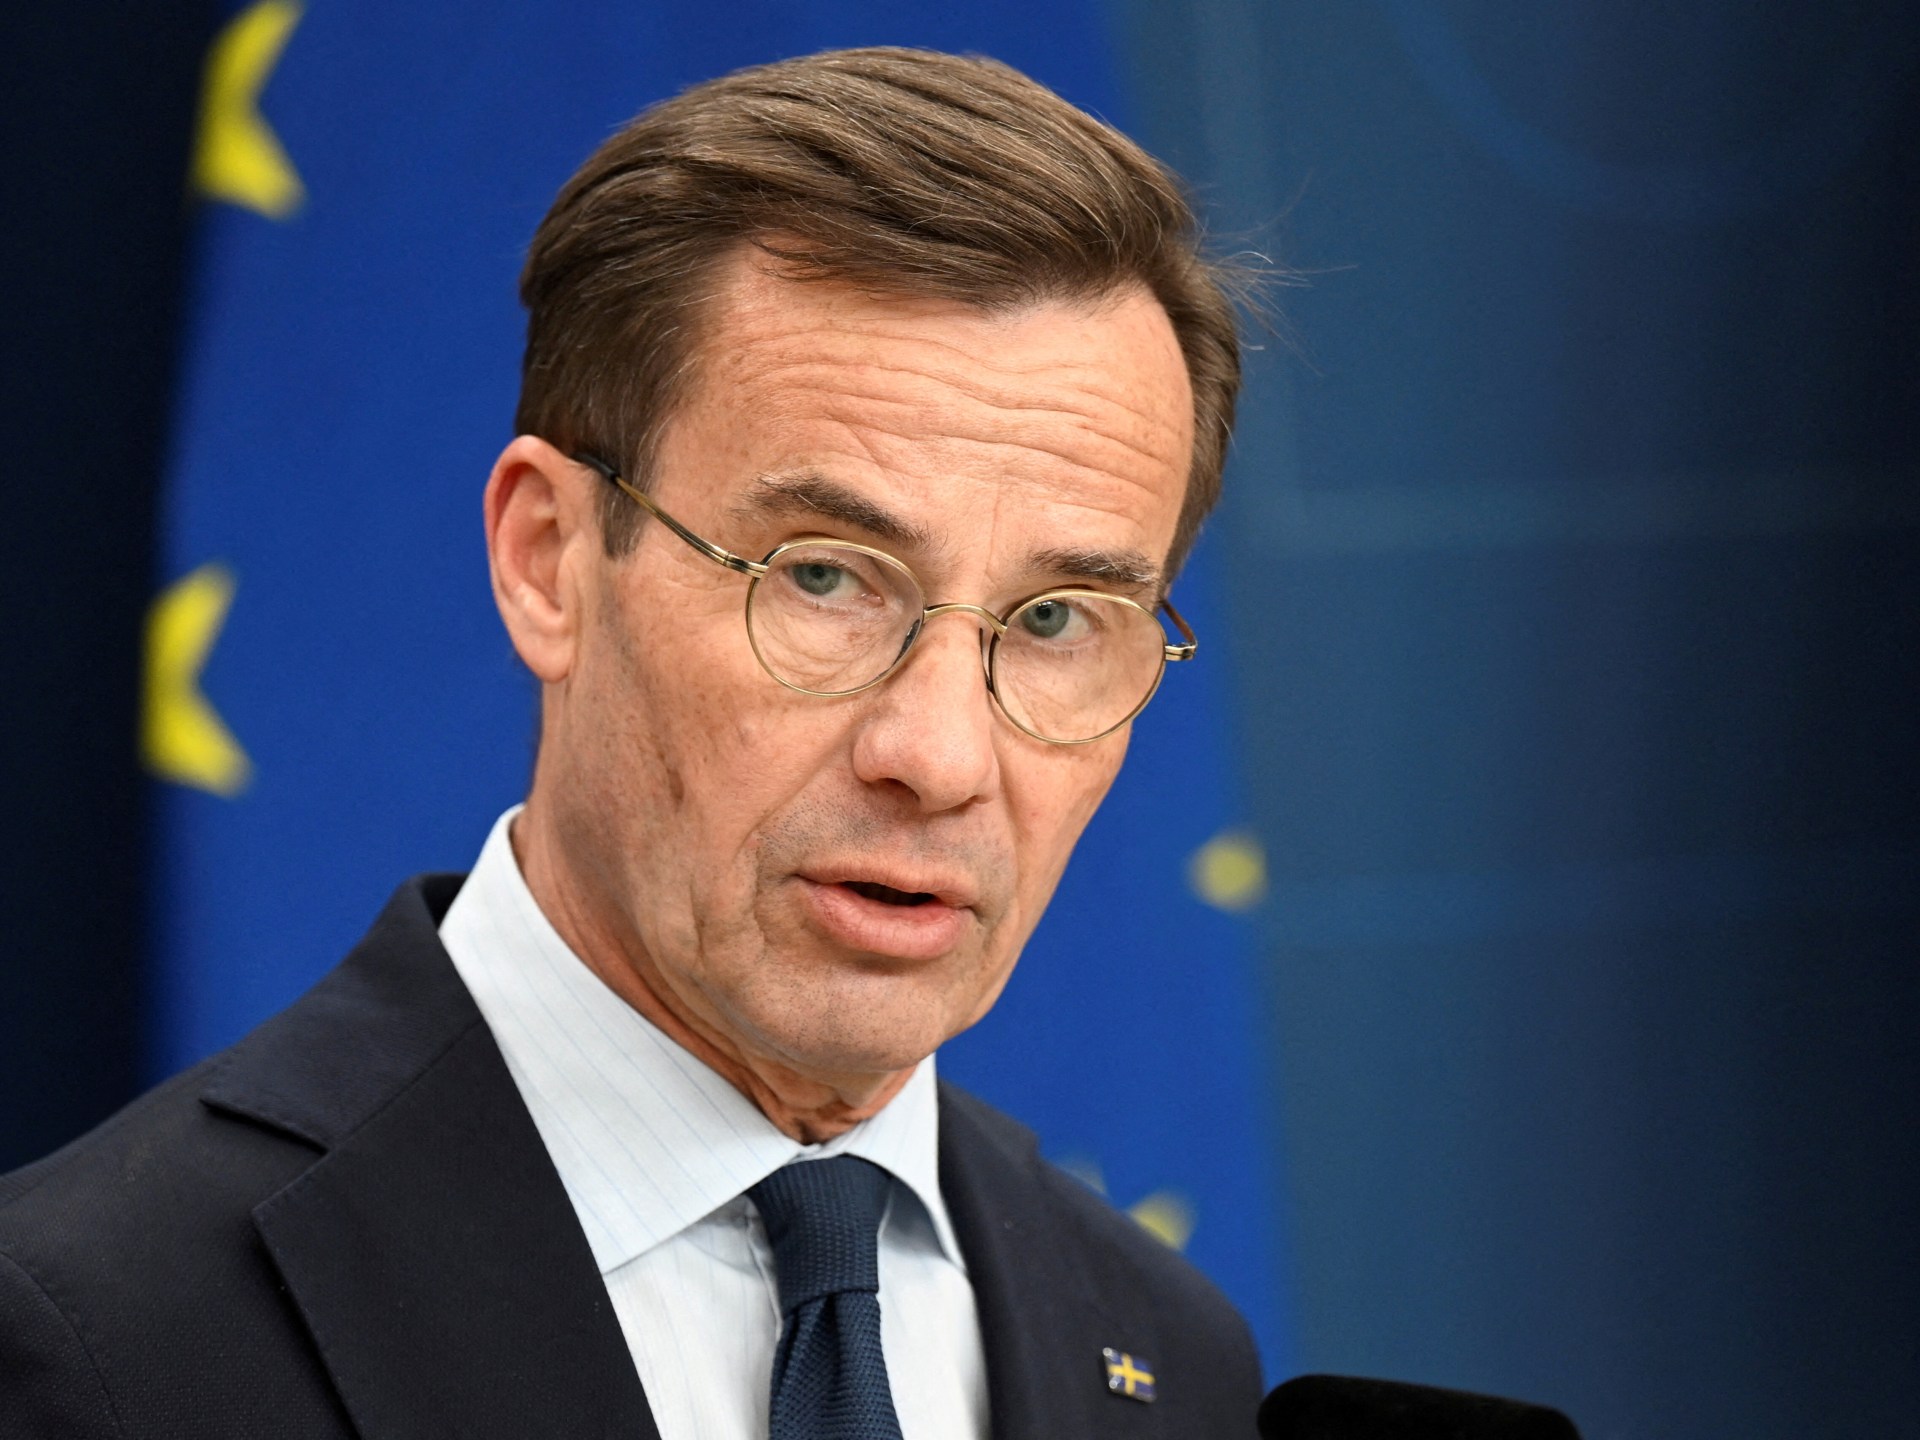 Swedish PM Kristersson agrees to meet Hungary’s Orban for talks on NATO bid | NATO News